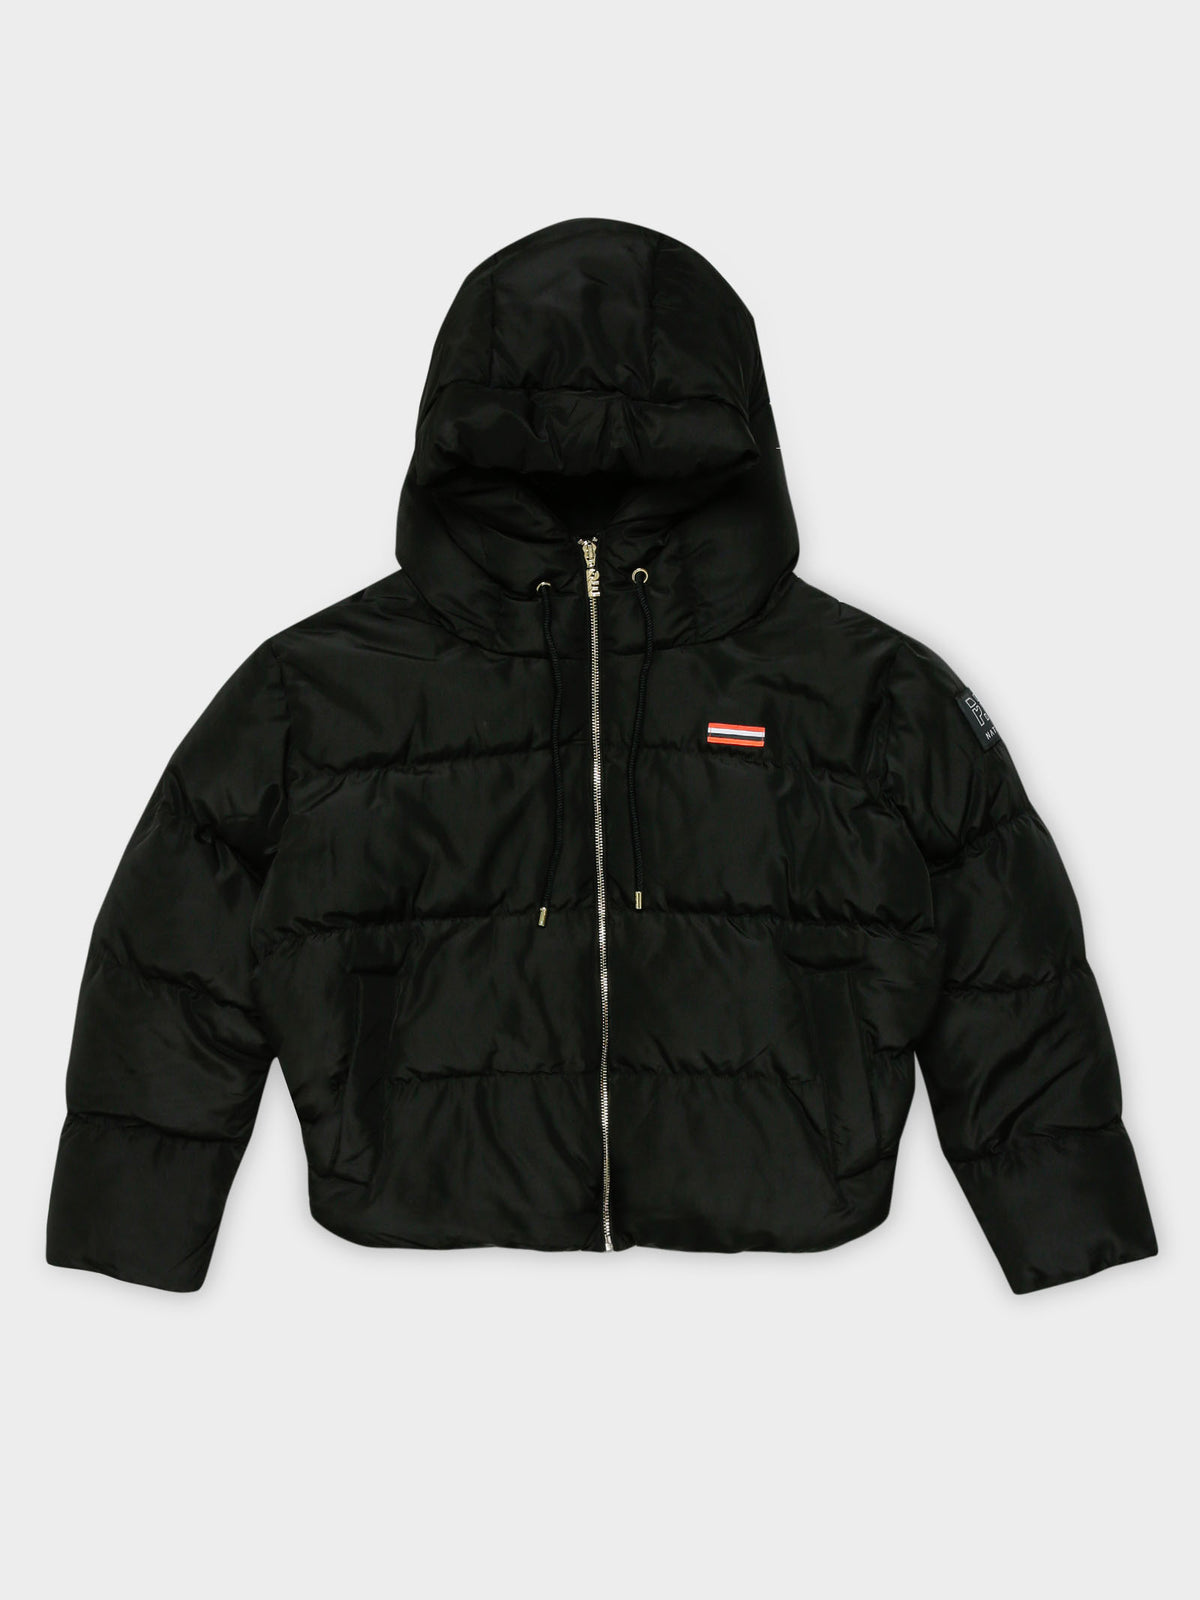 The Original Recycled Jacket in Black